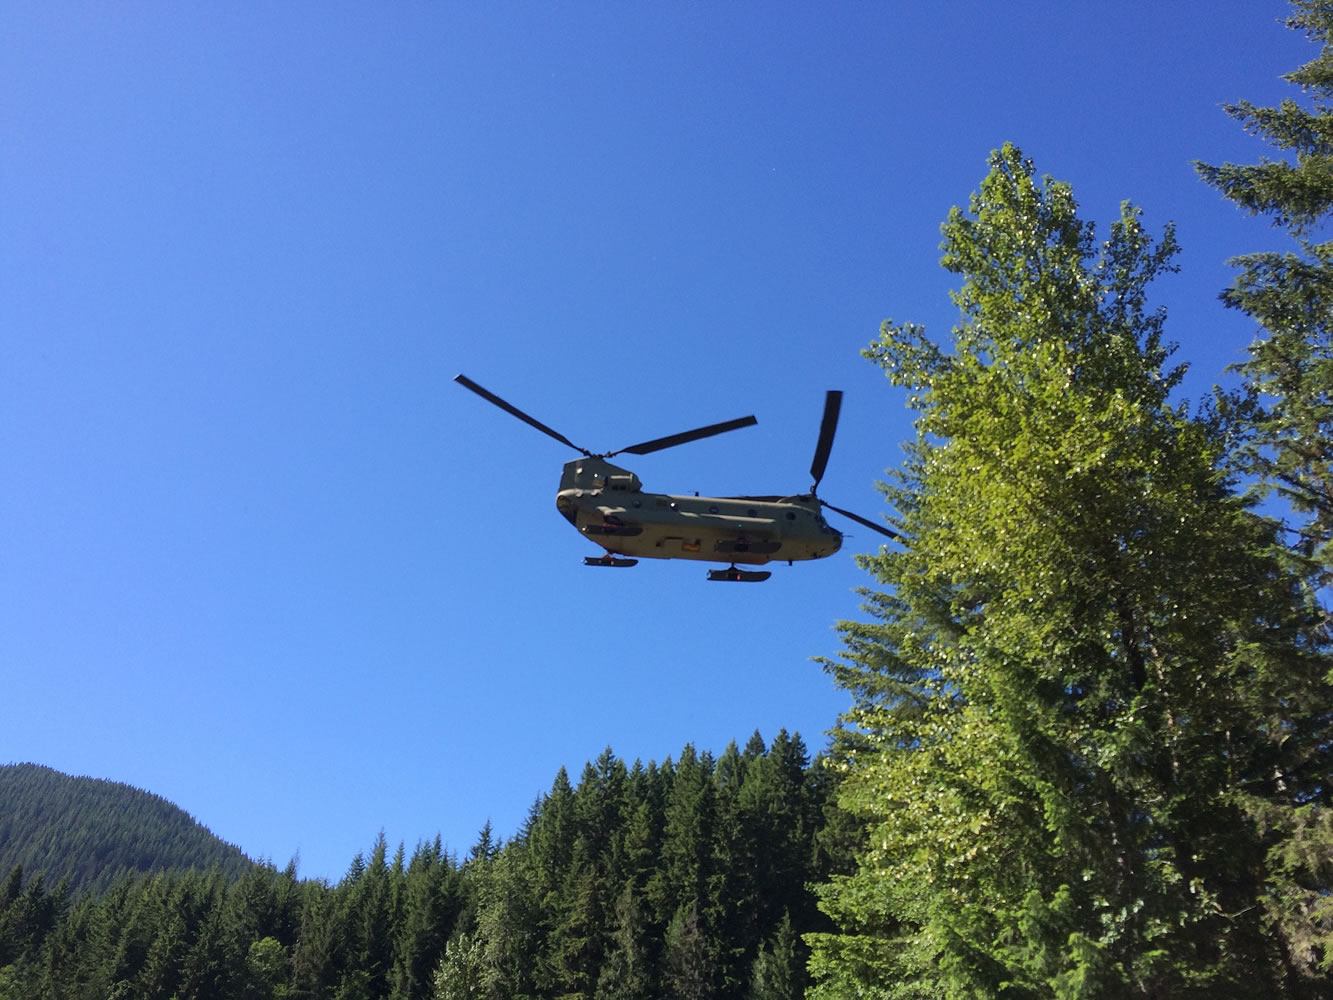 In this photo provided by the National Park Service, a U.S. Army Reserve 214th Air Division Chinook is used to search for missing Utah climber, Kyle Bufis, on Mount Rainier, Saturday, June 13, 2015, at Mount Rainier National Park, Wash. The search was called off Saturday afternoon after a helicopter spotted the body of a deceased male climber near the summit.